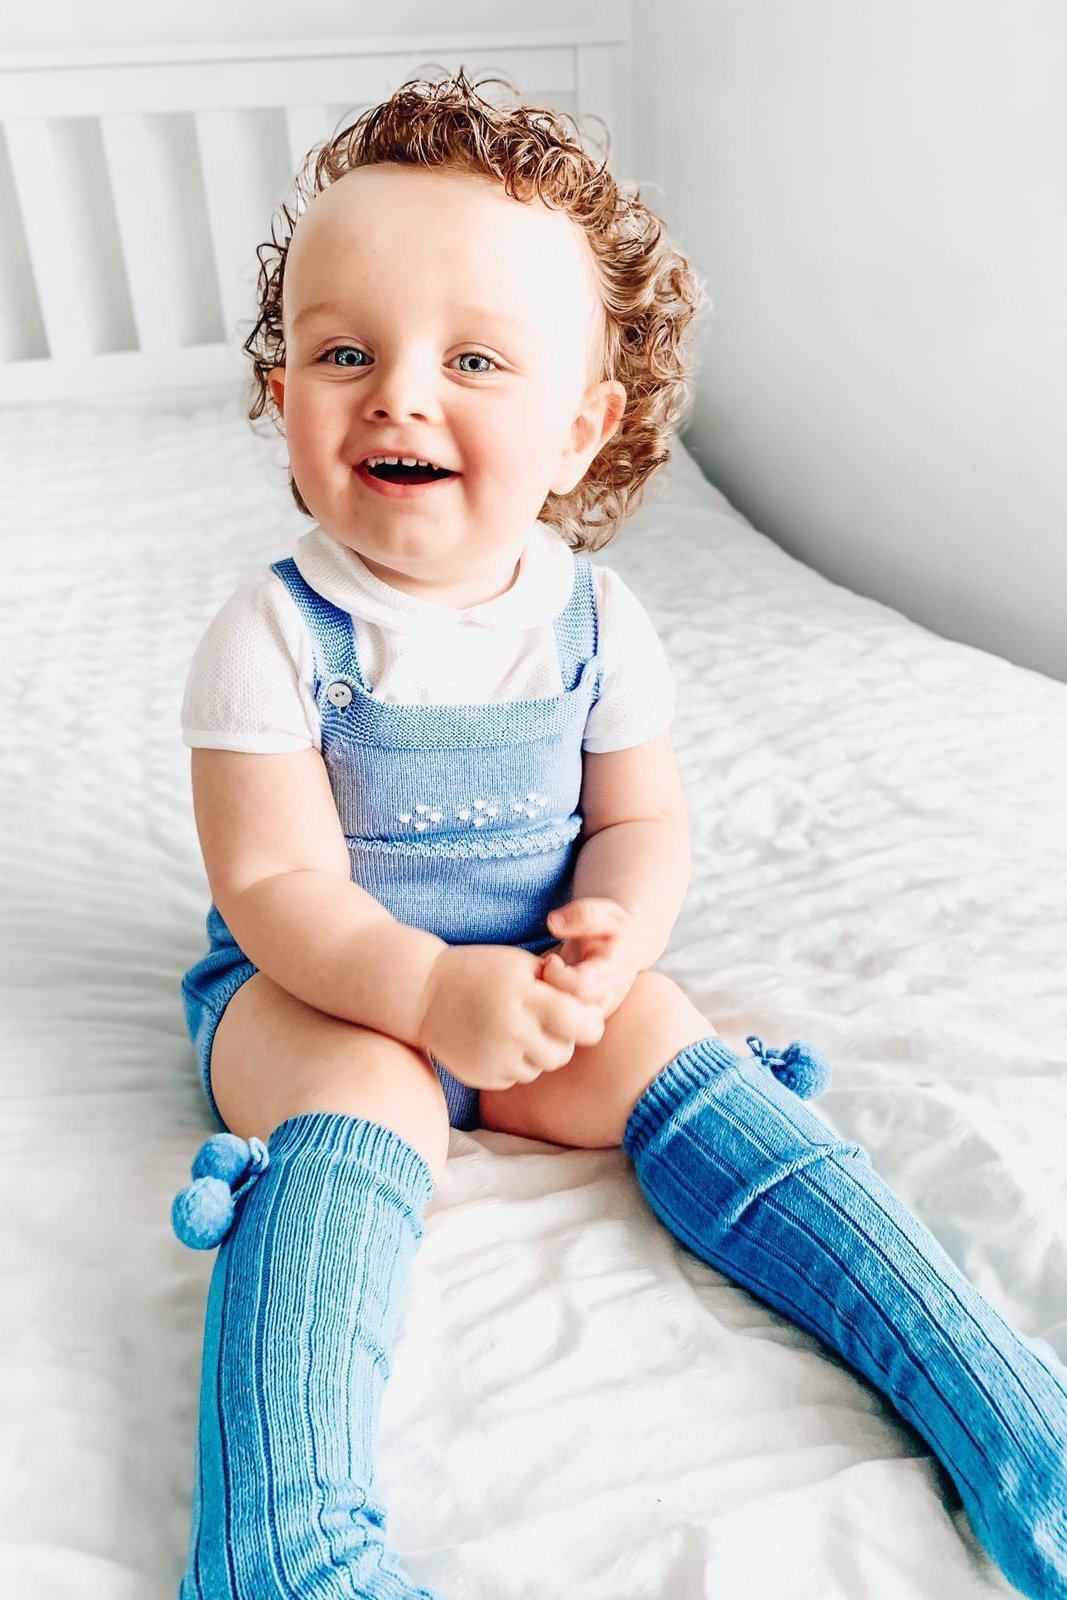 Granlei Classic Knitted Dungaree Romper - Dusky Blue | Millie and John